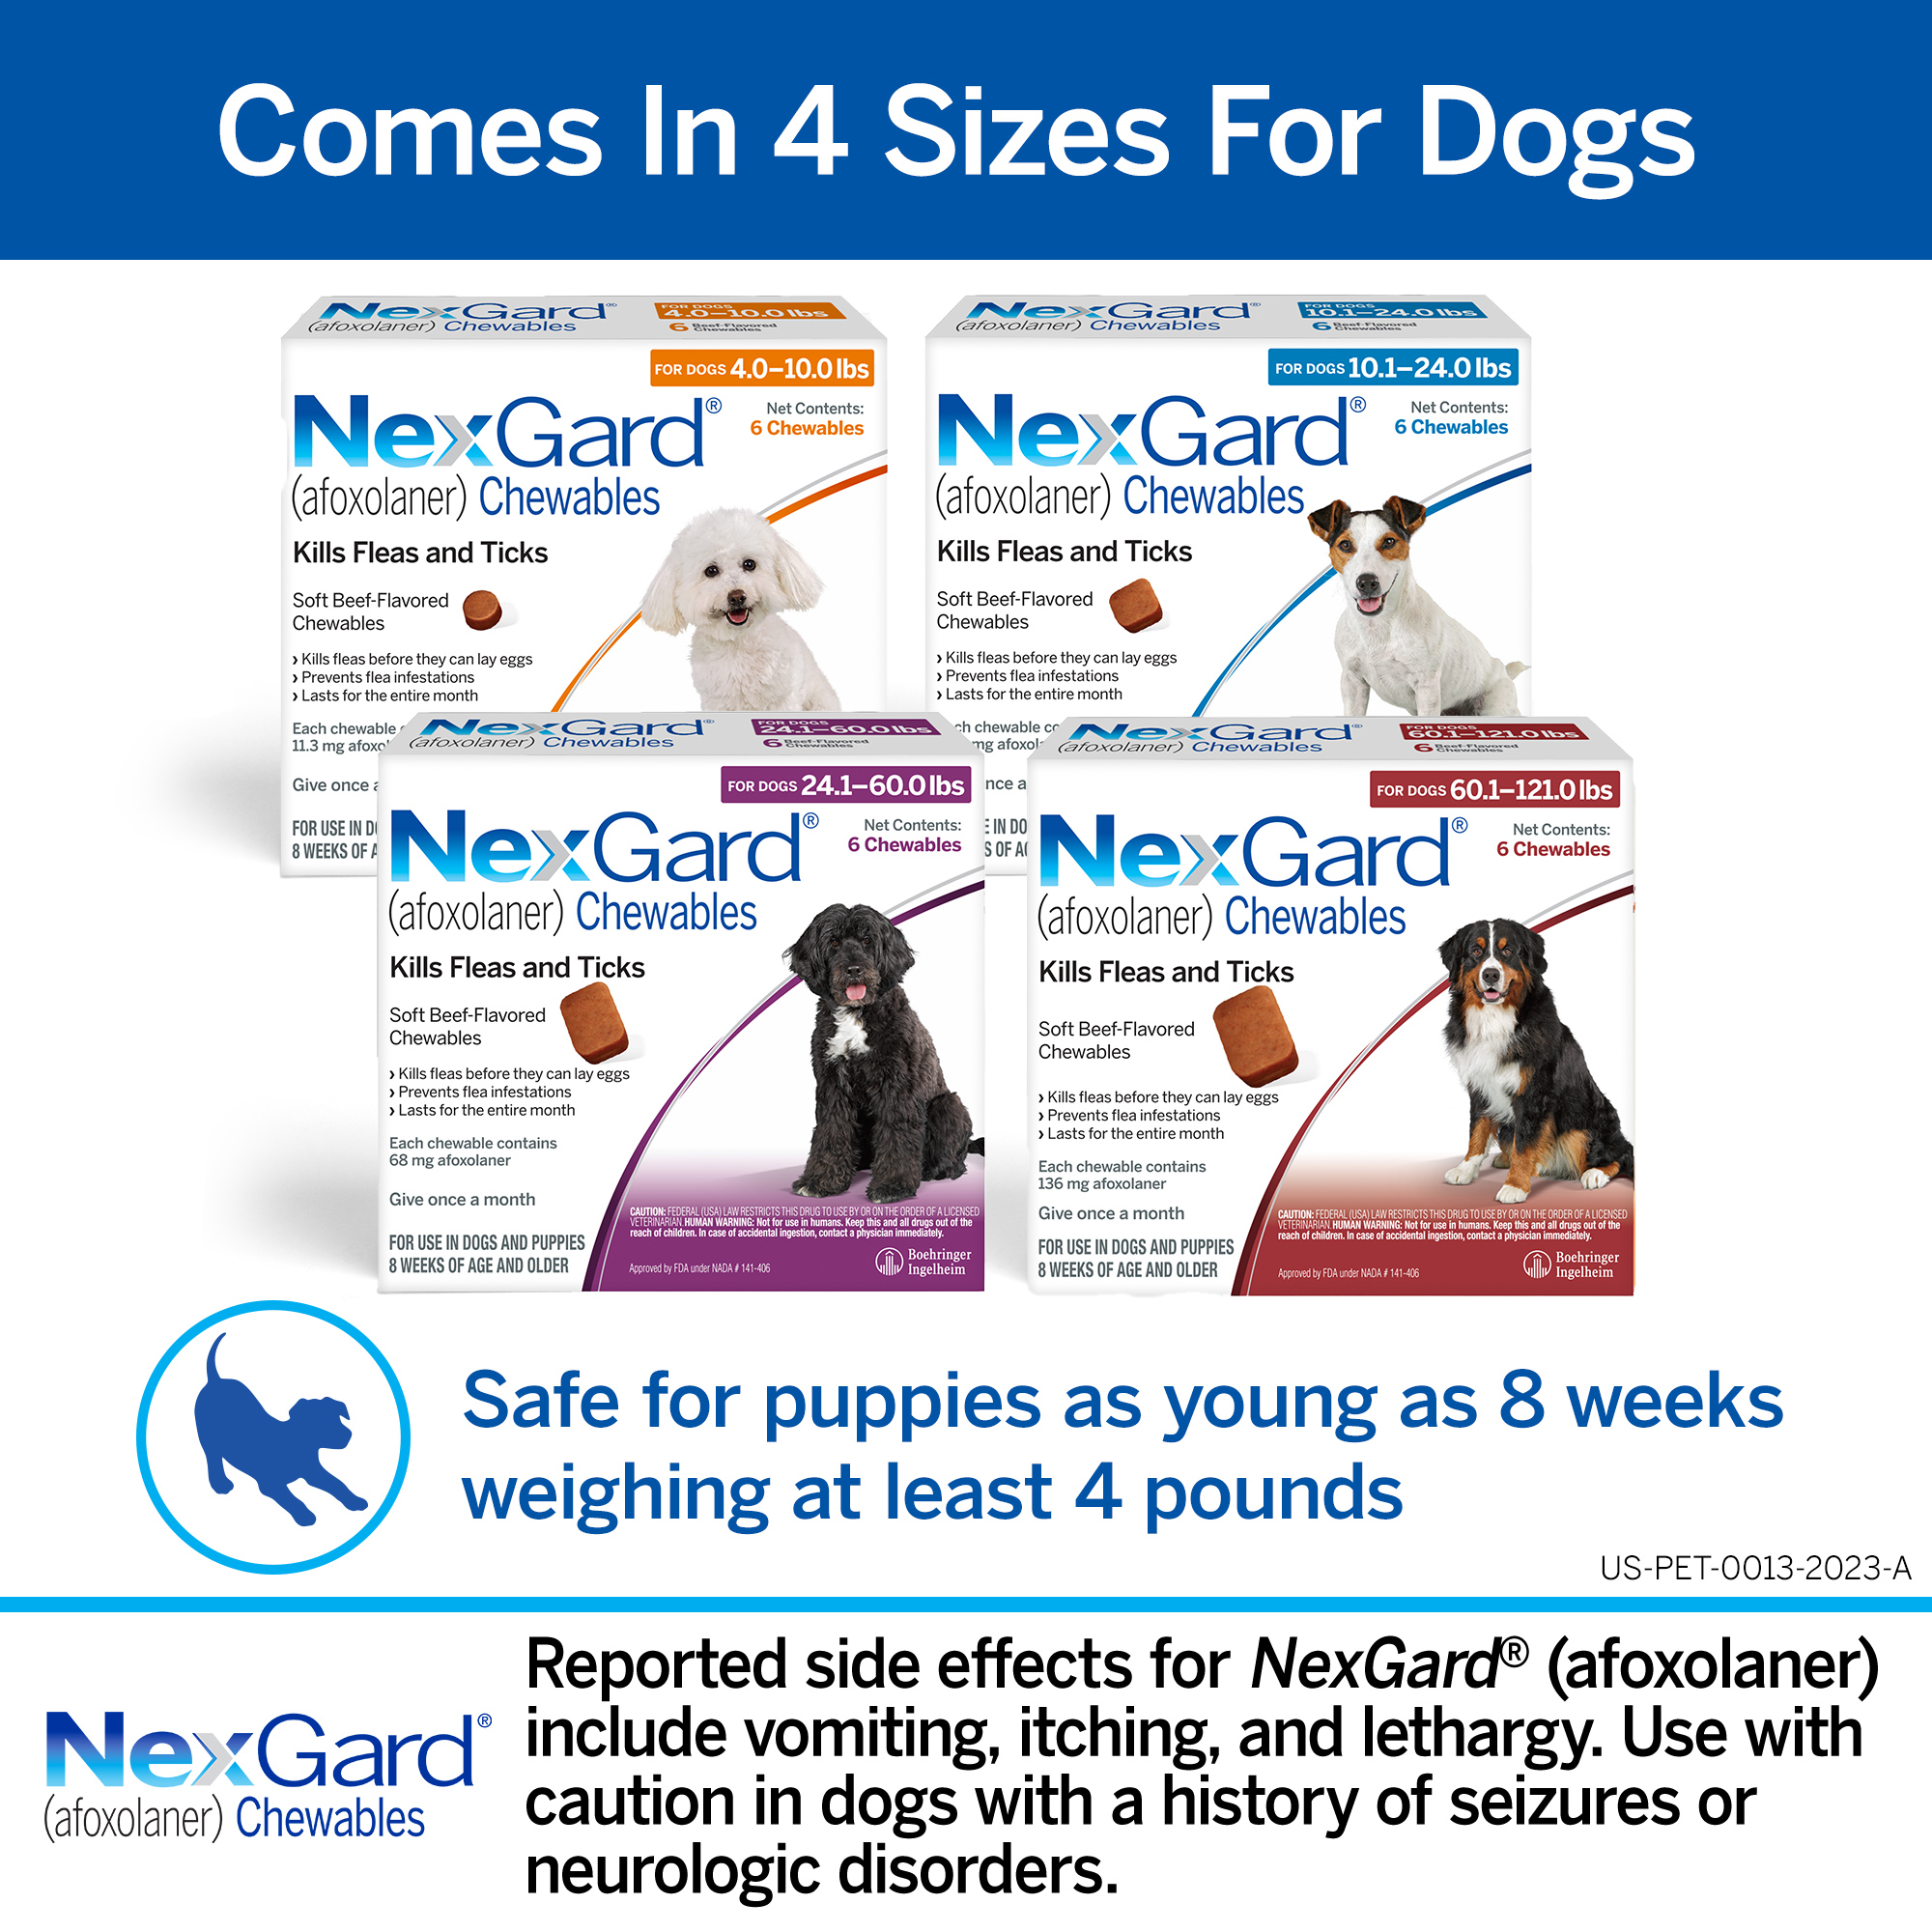 NexGard Chew for Dogs 10 1 24 lbs Blue Box 6 Chewable Tablets 